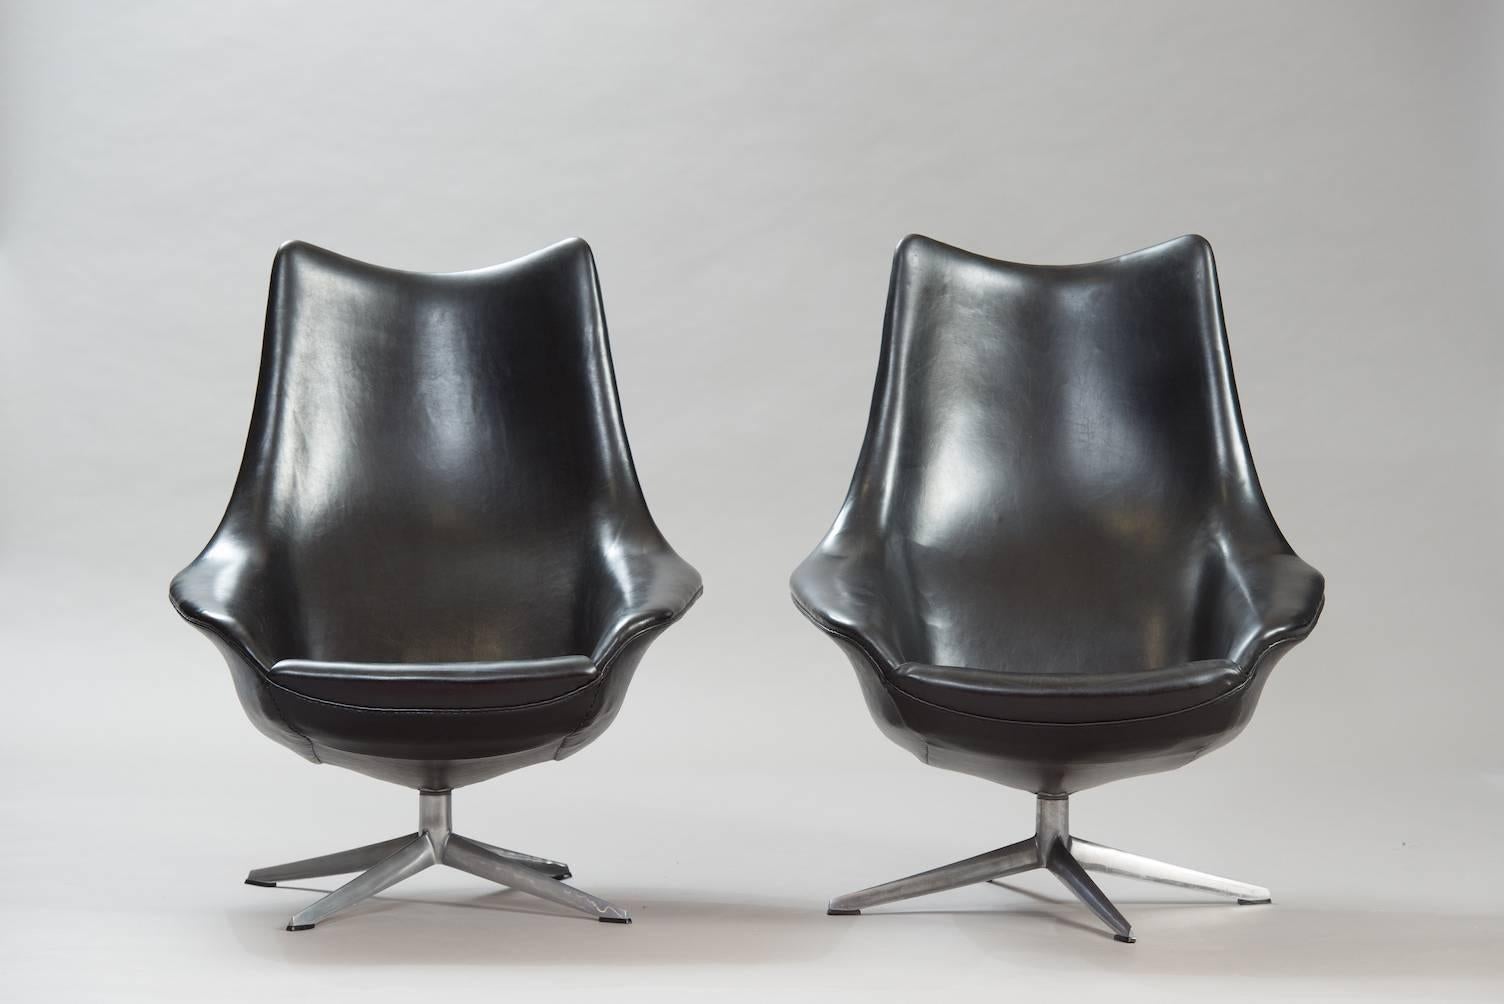 Pair of swivel lounge chairs “Pirouette” model, aluminium base, upholstered in black faux leather.